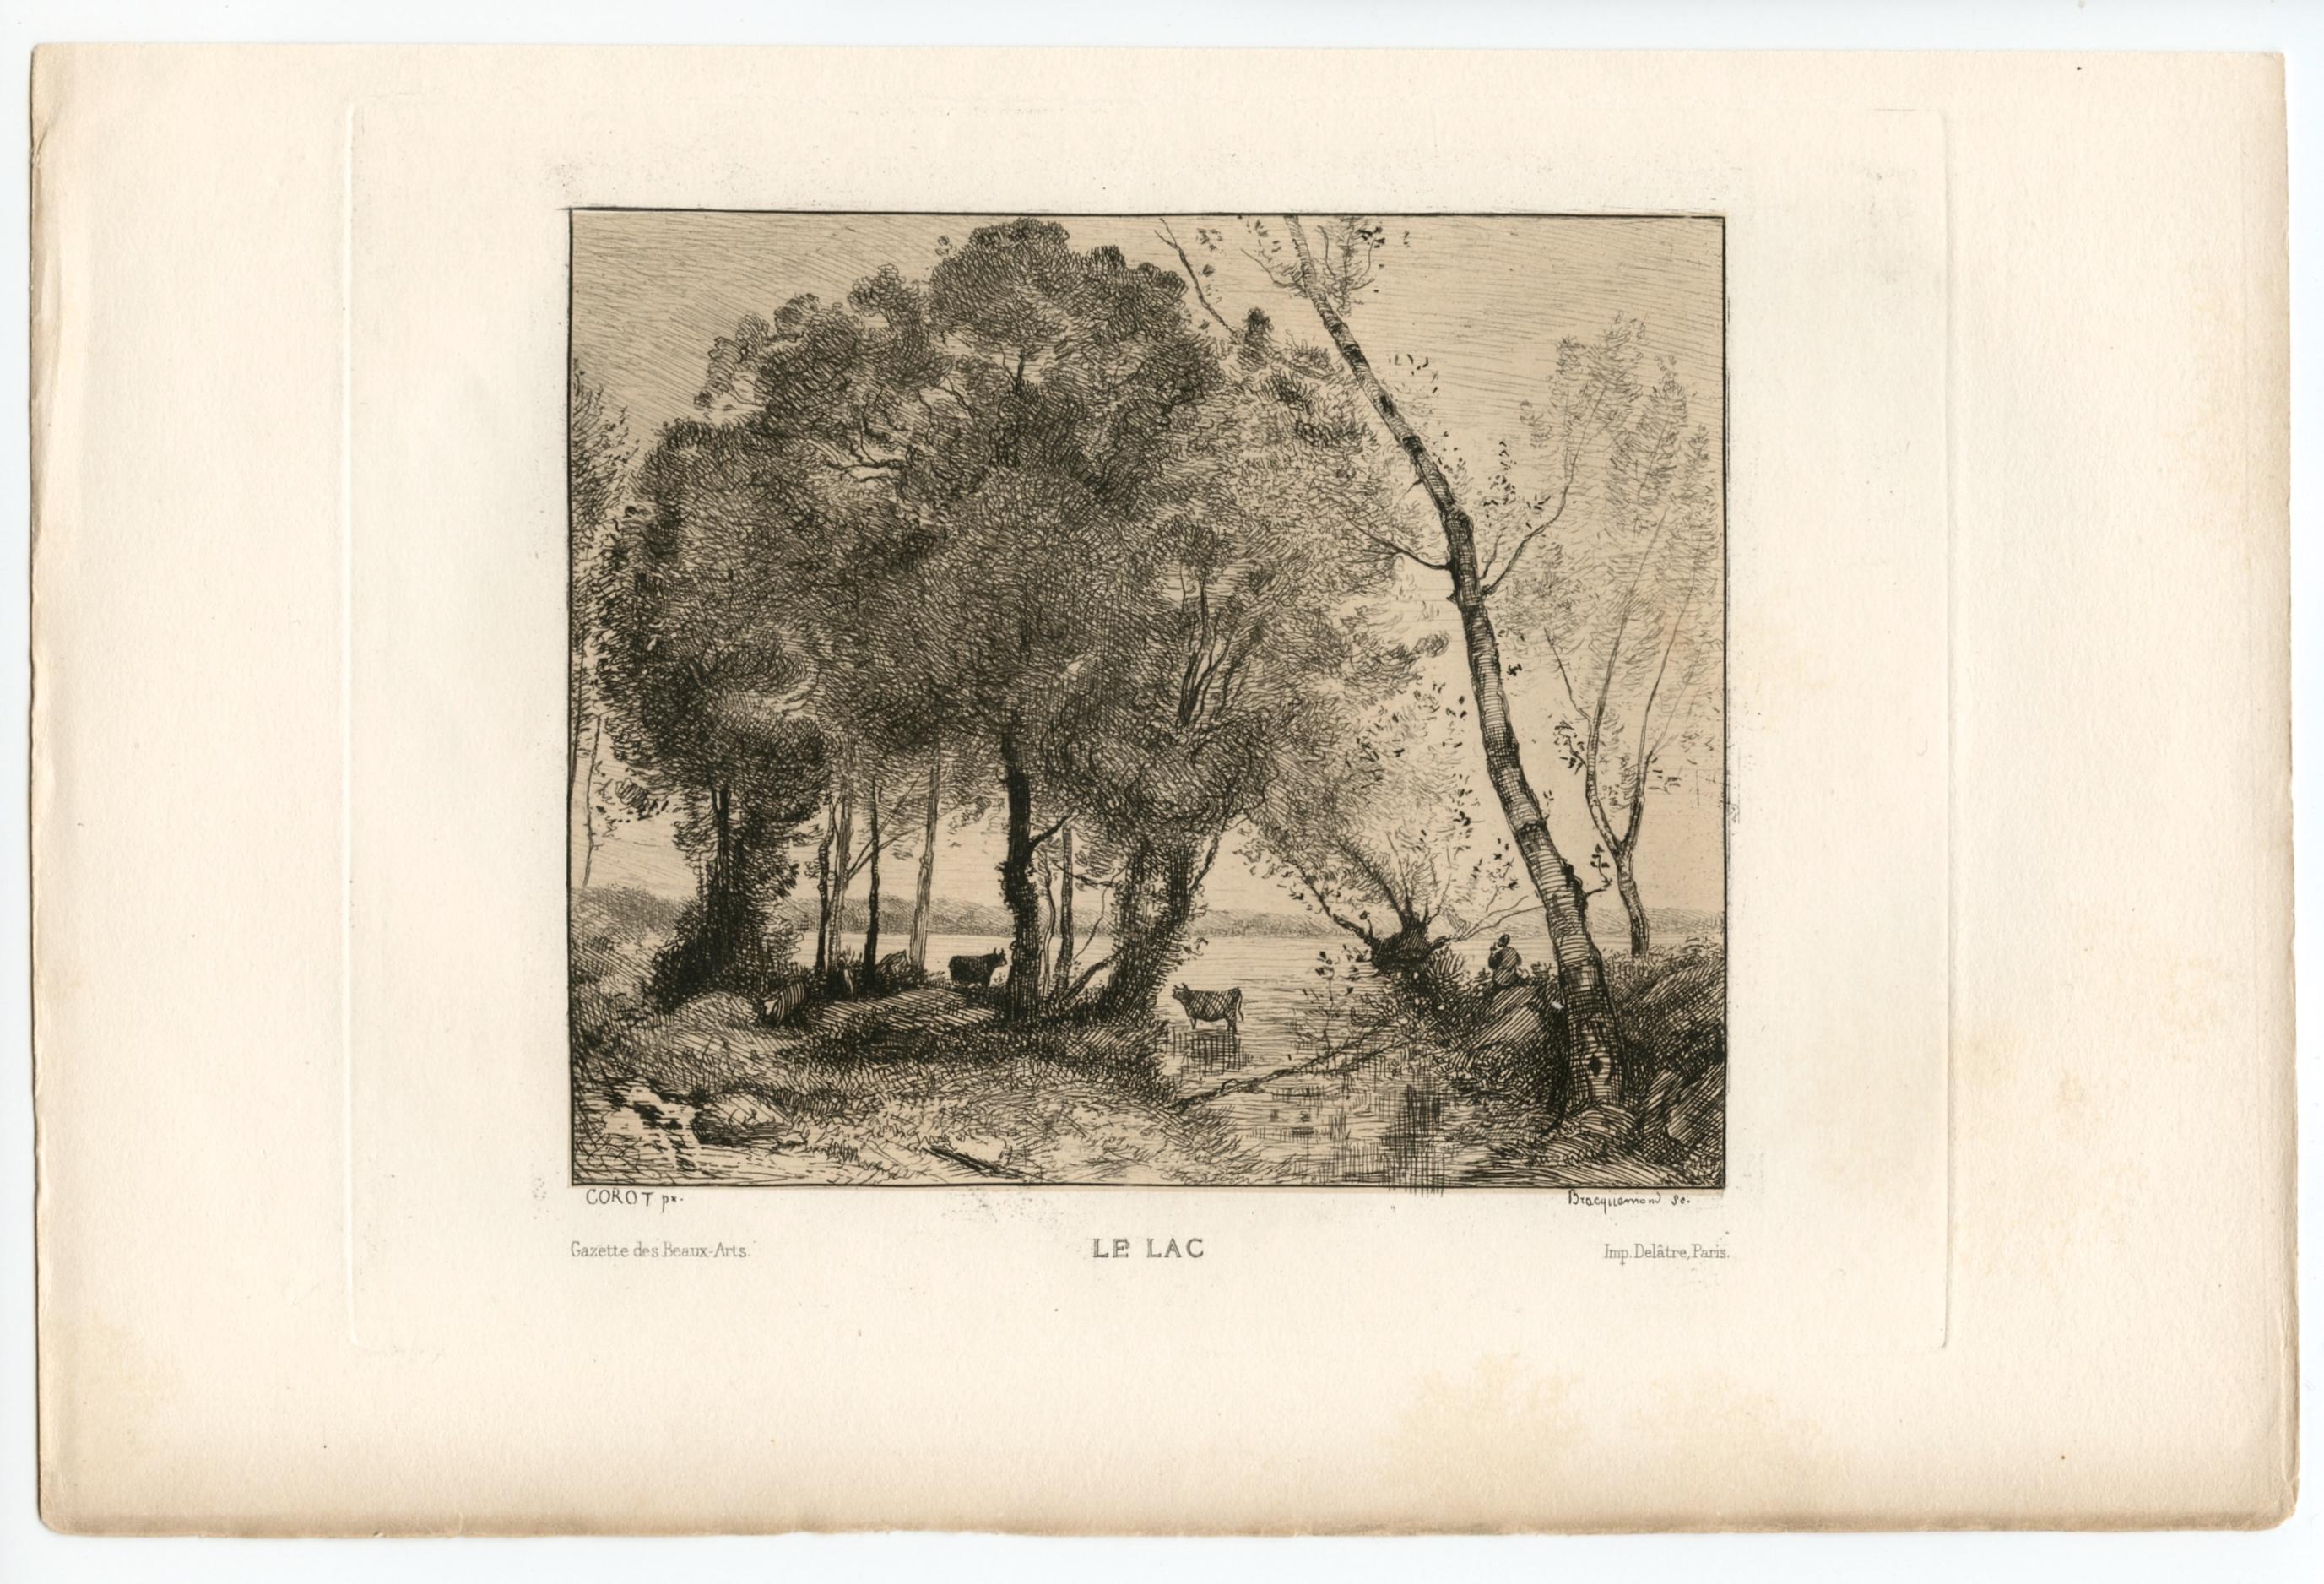 Medium: etching. Etched by Felix Bracquemond after Corot. Printed in Paris by Delâtre and published by the Gazette des Beaux-Arts in 1861. This impression was printed on chine-collé paper. Image size: 4 7/8 x 5 3/4 inches (122 x 145 mm). Sheet size: